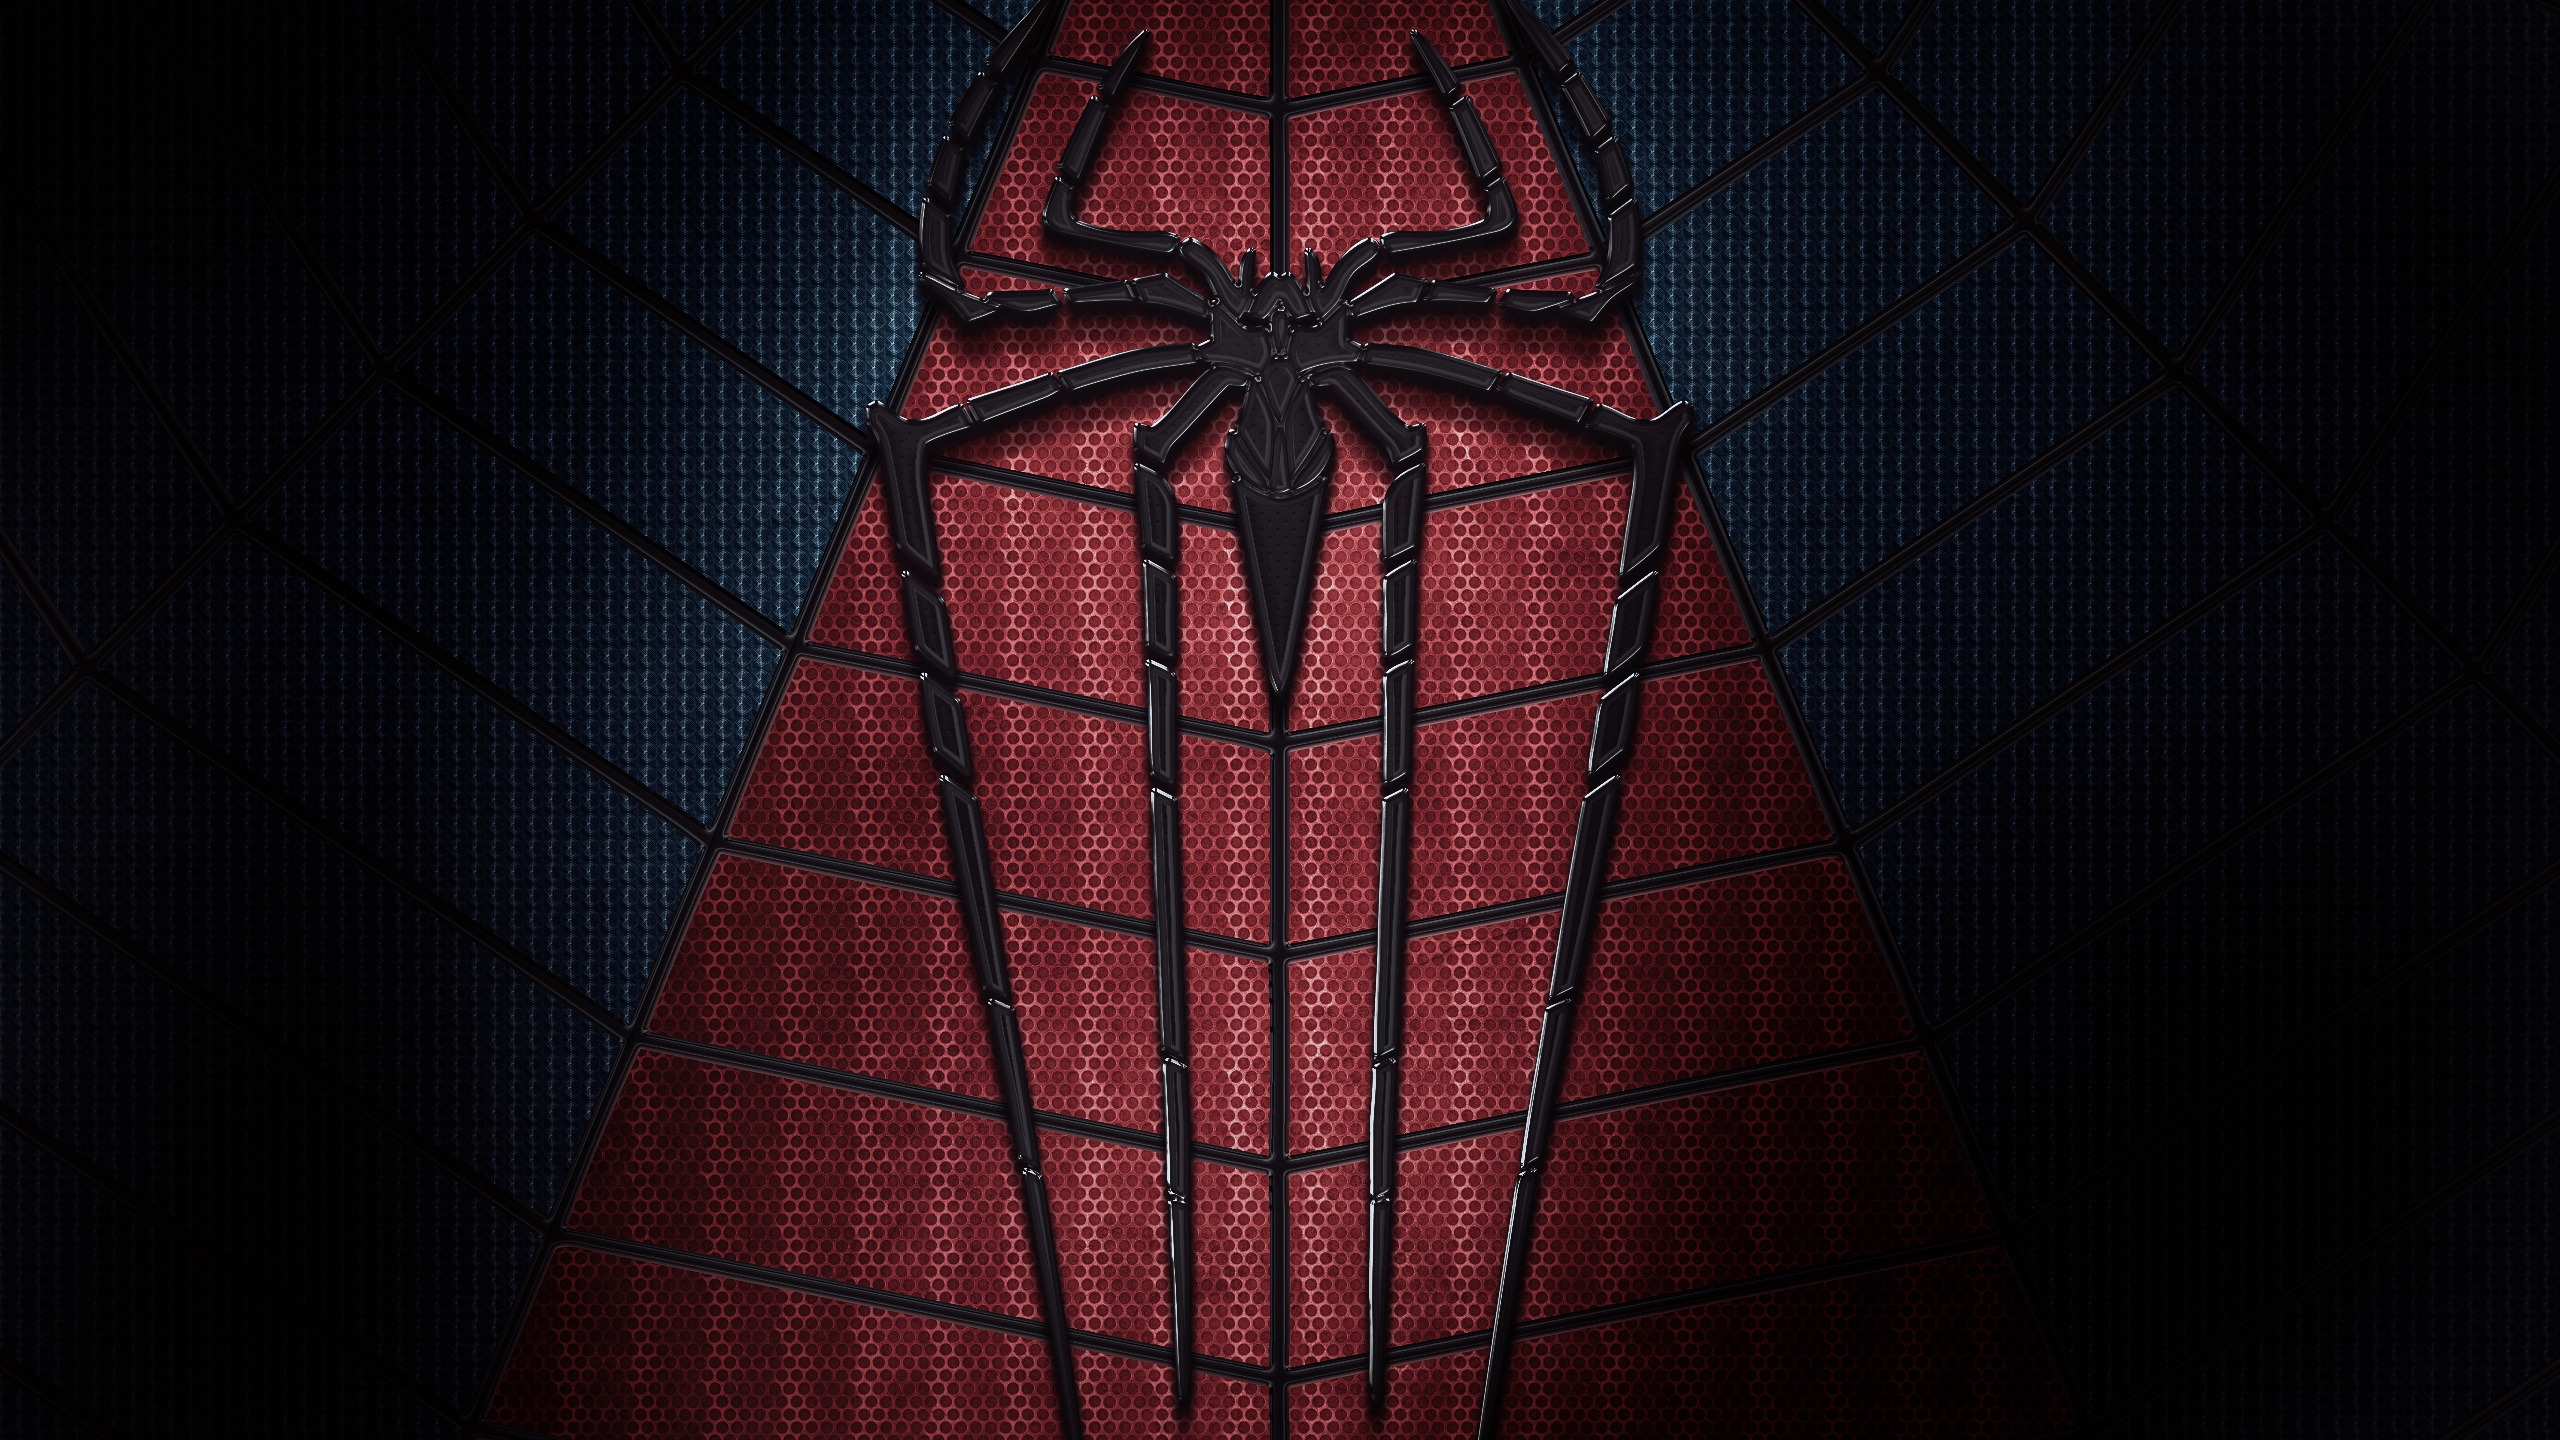 The Amazing Spider Man 2014 for 2560x1440 HDTV resolution